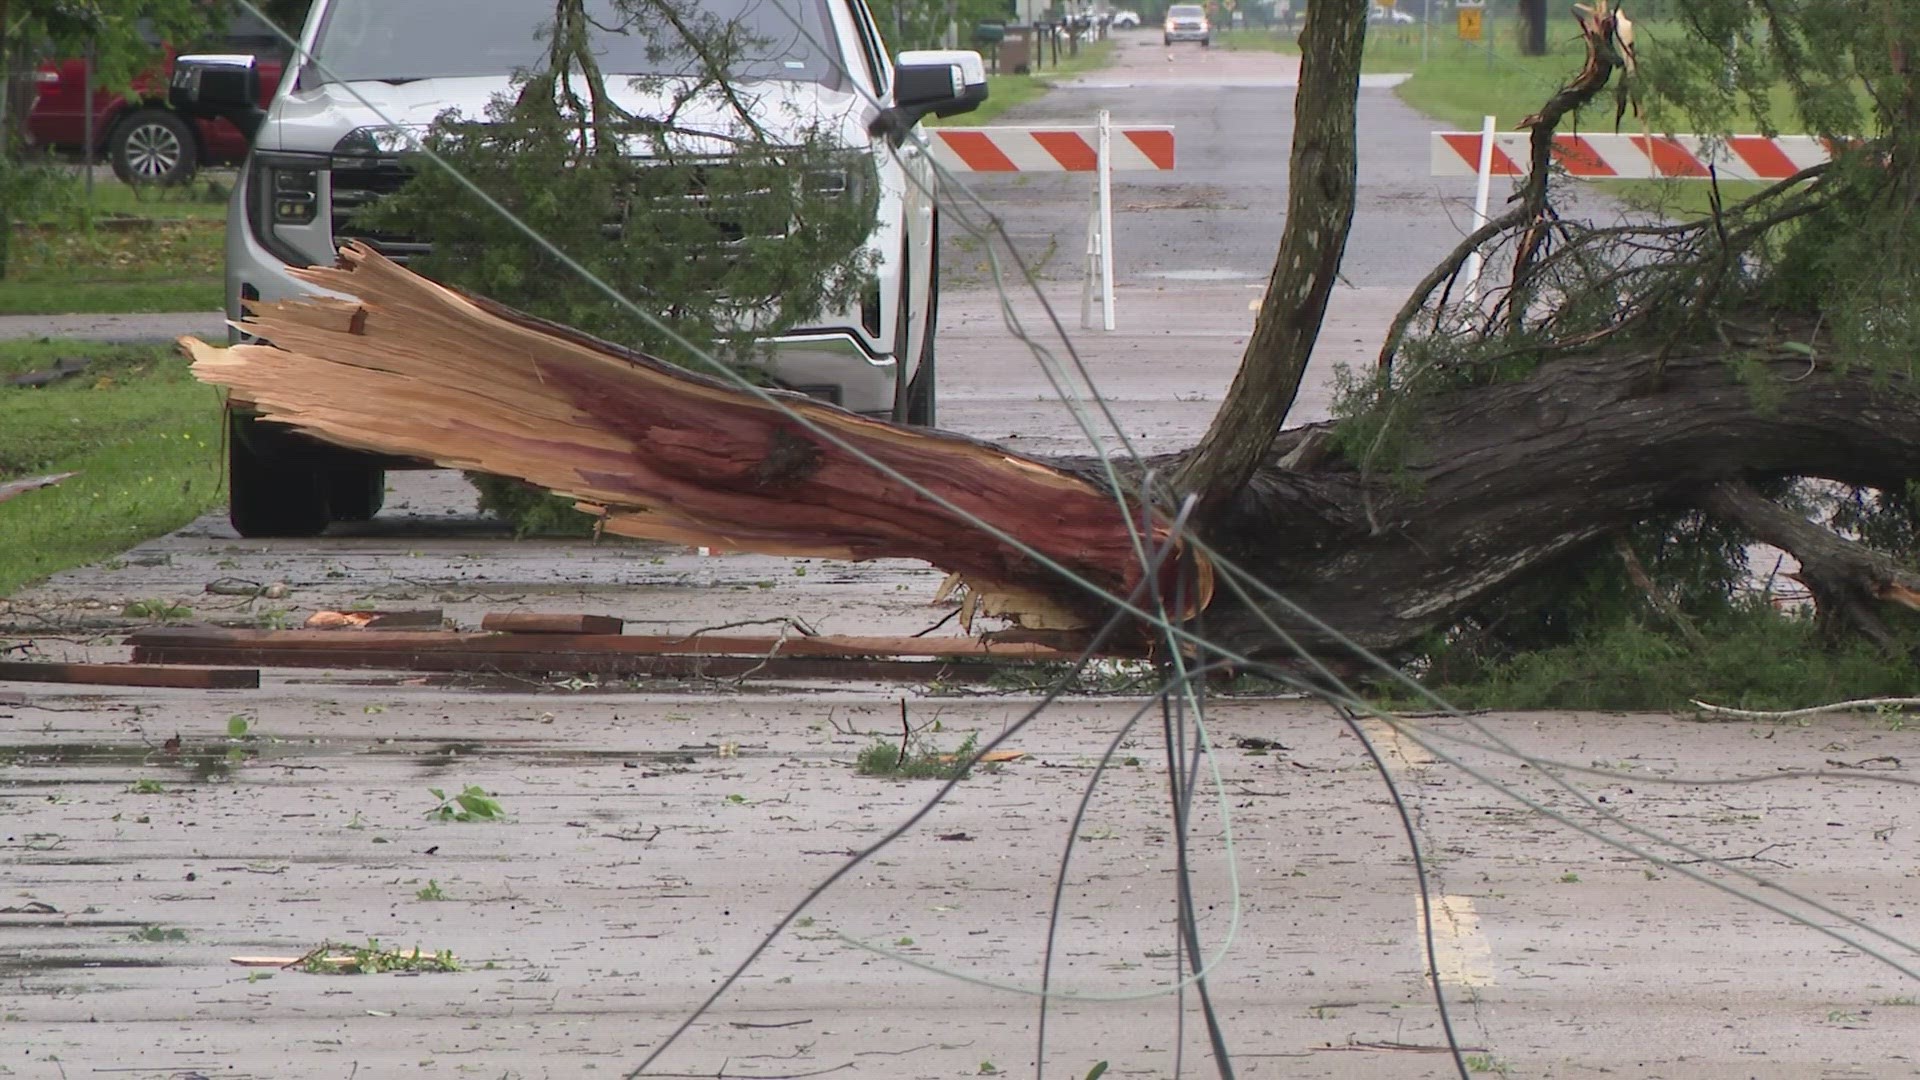 The storm brought down some power poles and trees in the Galveston area Wednesday morning.